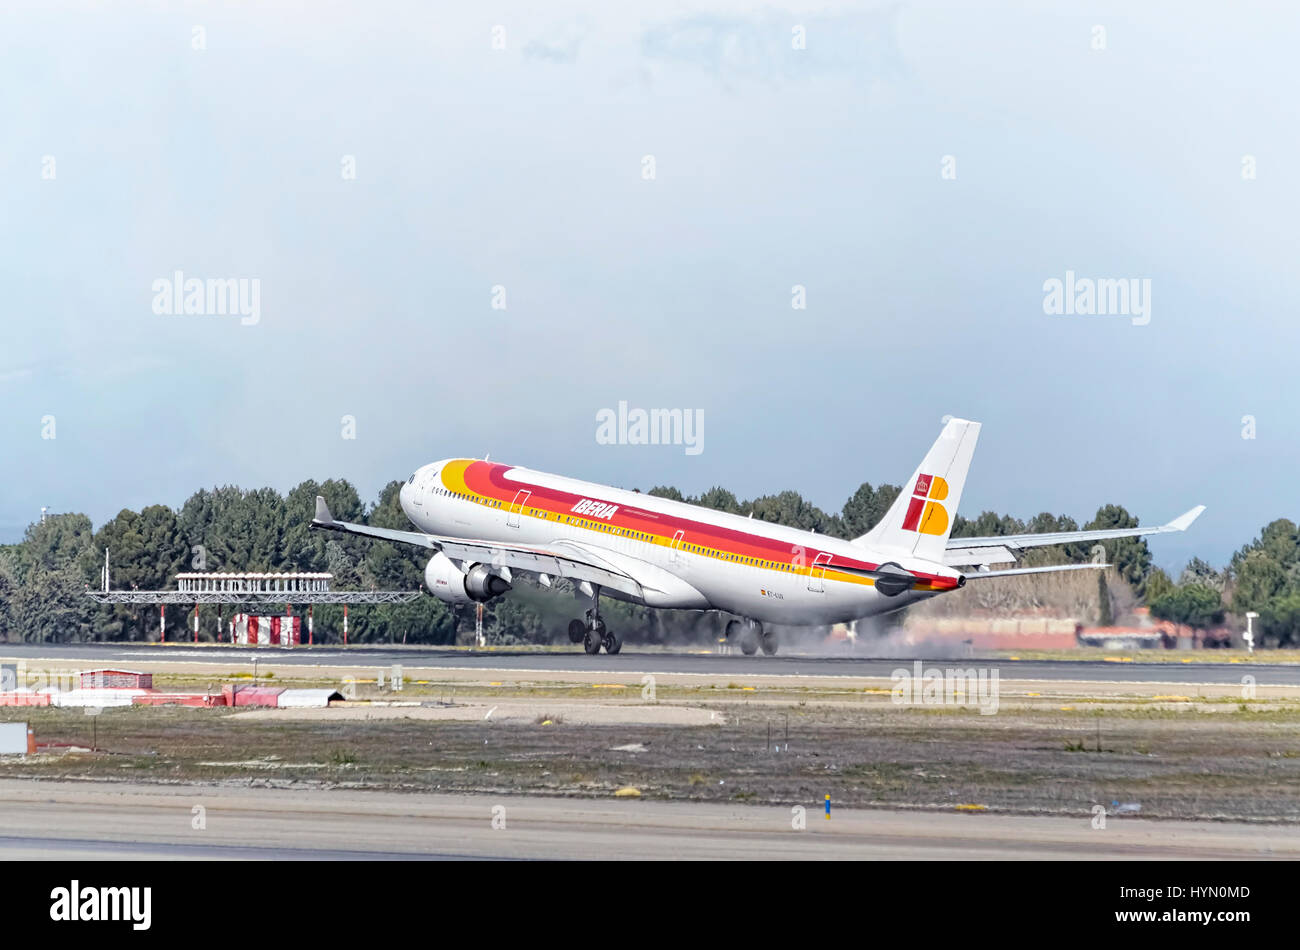 Plane Airbus A330, of spanish airline Iberia, is landing in Madrid - Barajas, Adolfo Suarez airport. Touching the runway. Blue sky with clouds. Stock Photo